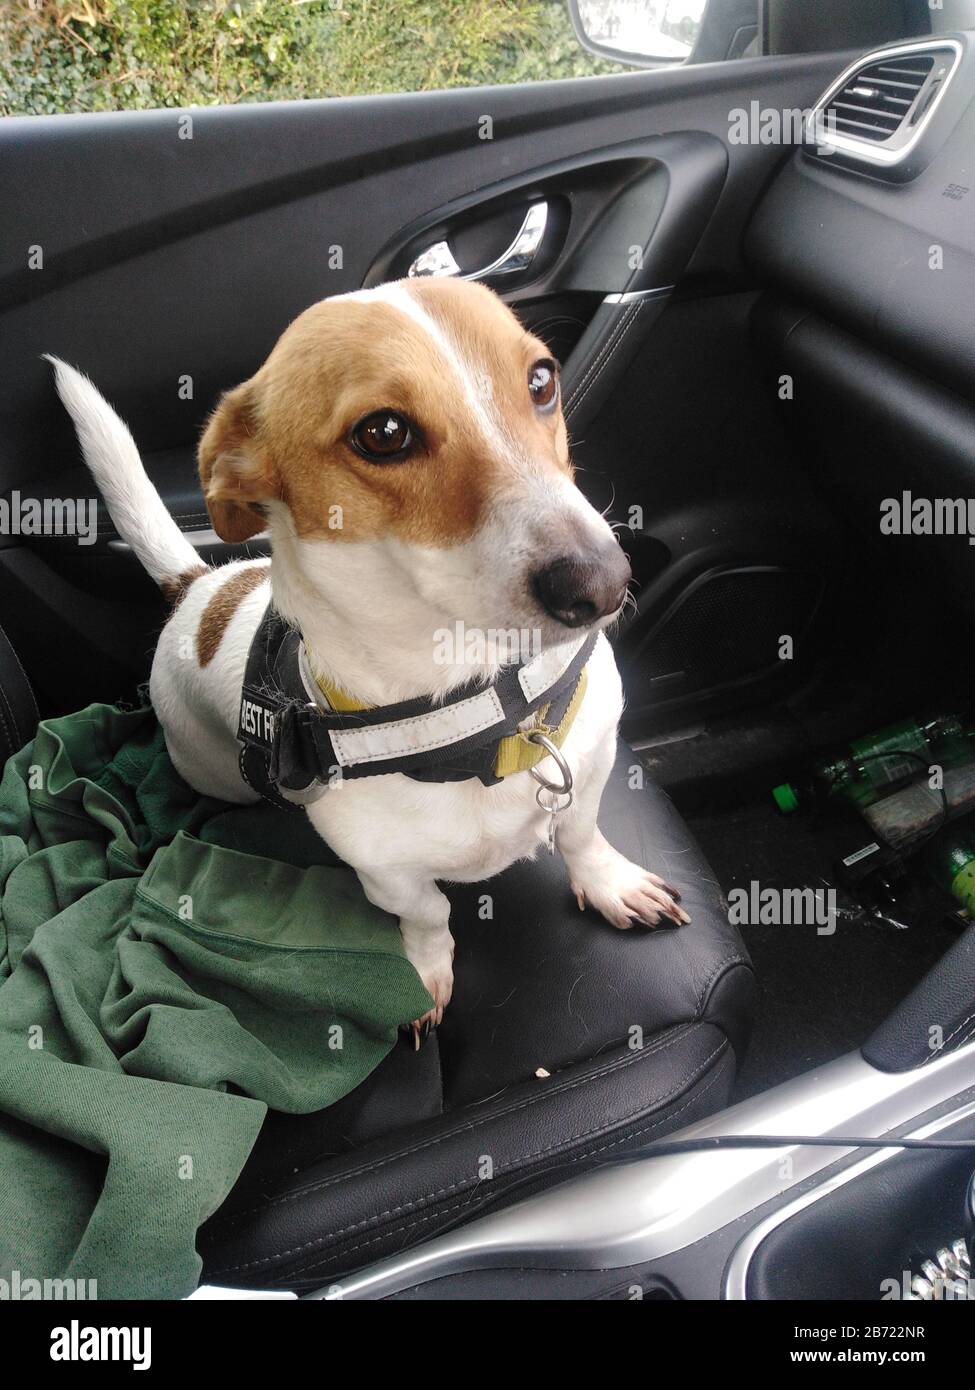 Harry, a Jack Russel Terrier, sitting on a car seat Ireland Stock Photo